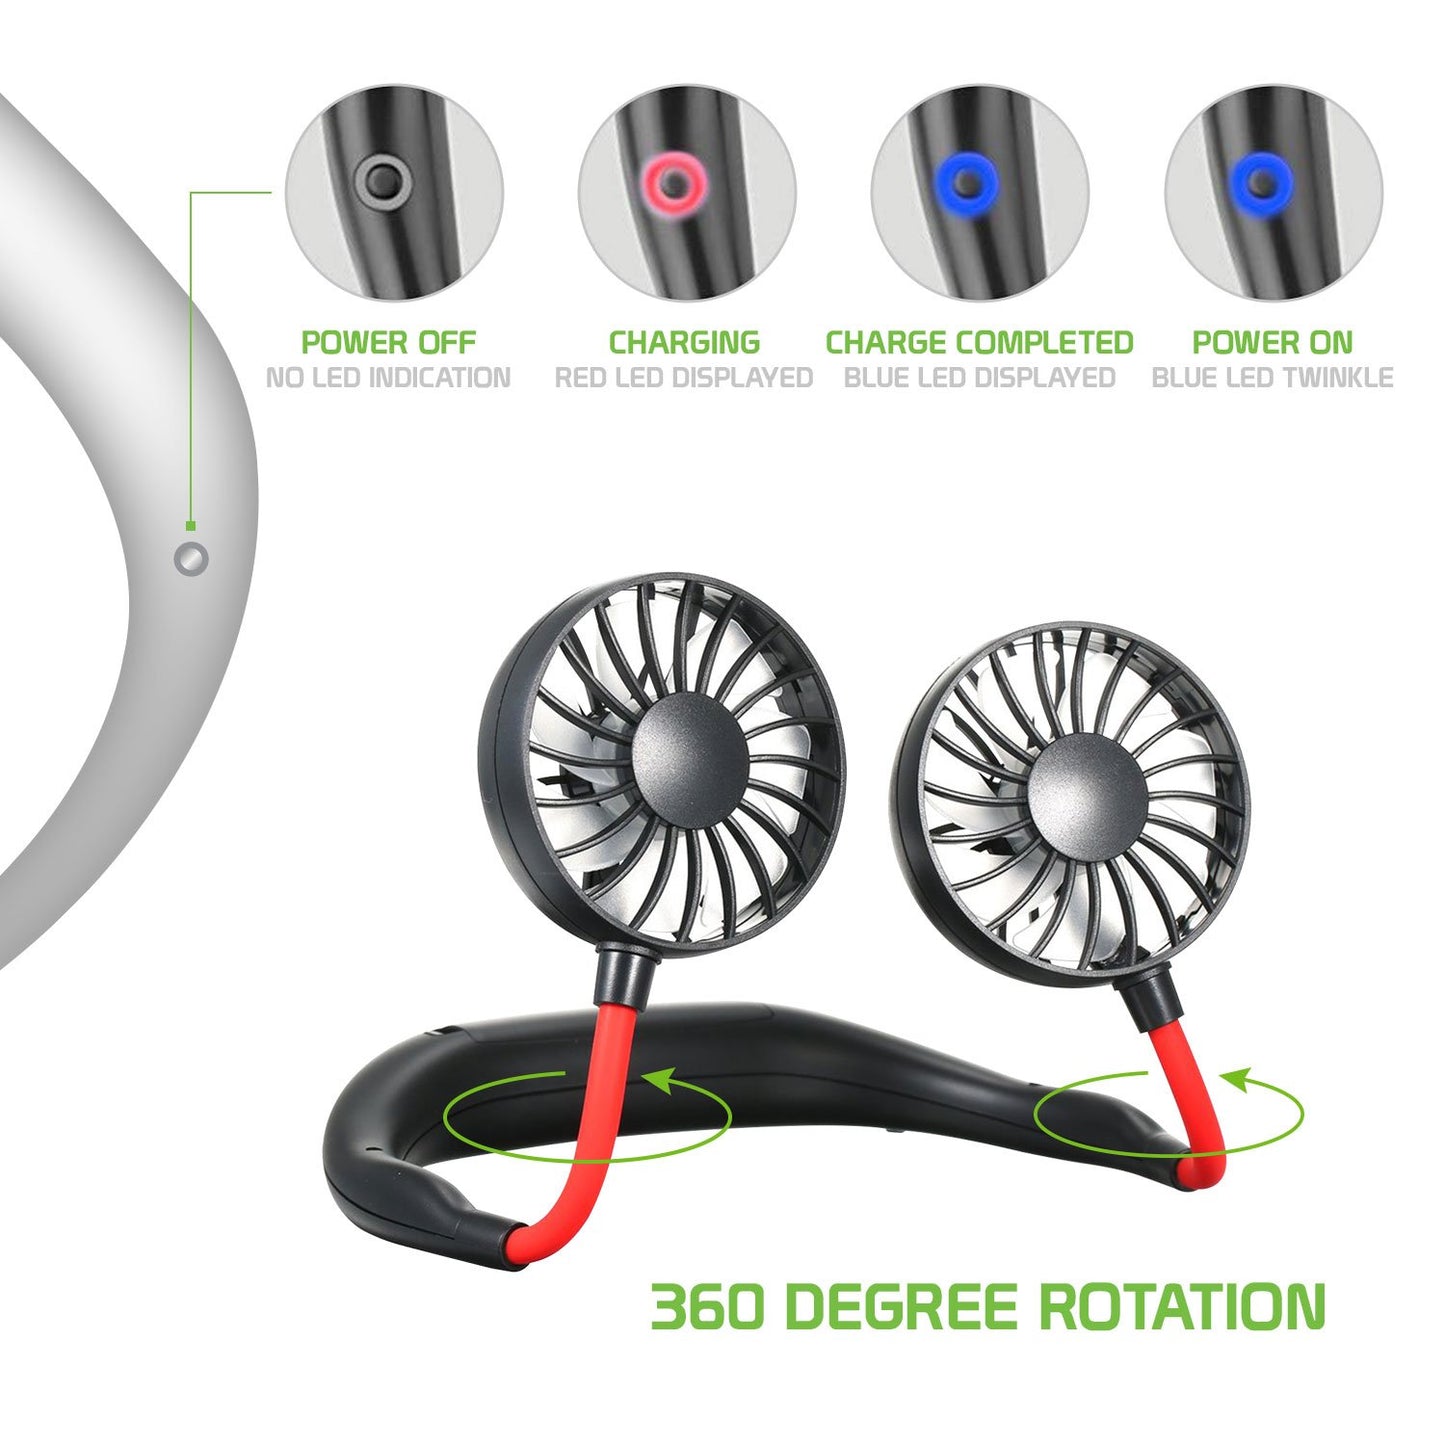 Portable Hands-free USB Rechargeable Neck Fan with 3 Speed Control and 360 Degree Rotation for Camping and Other Outdoor/Indoor Activities